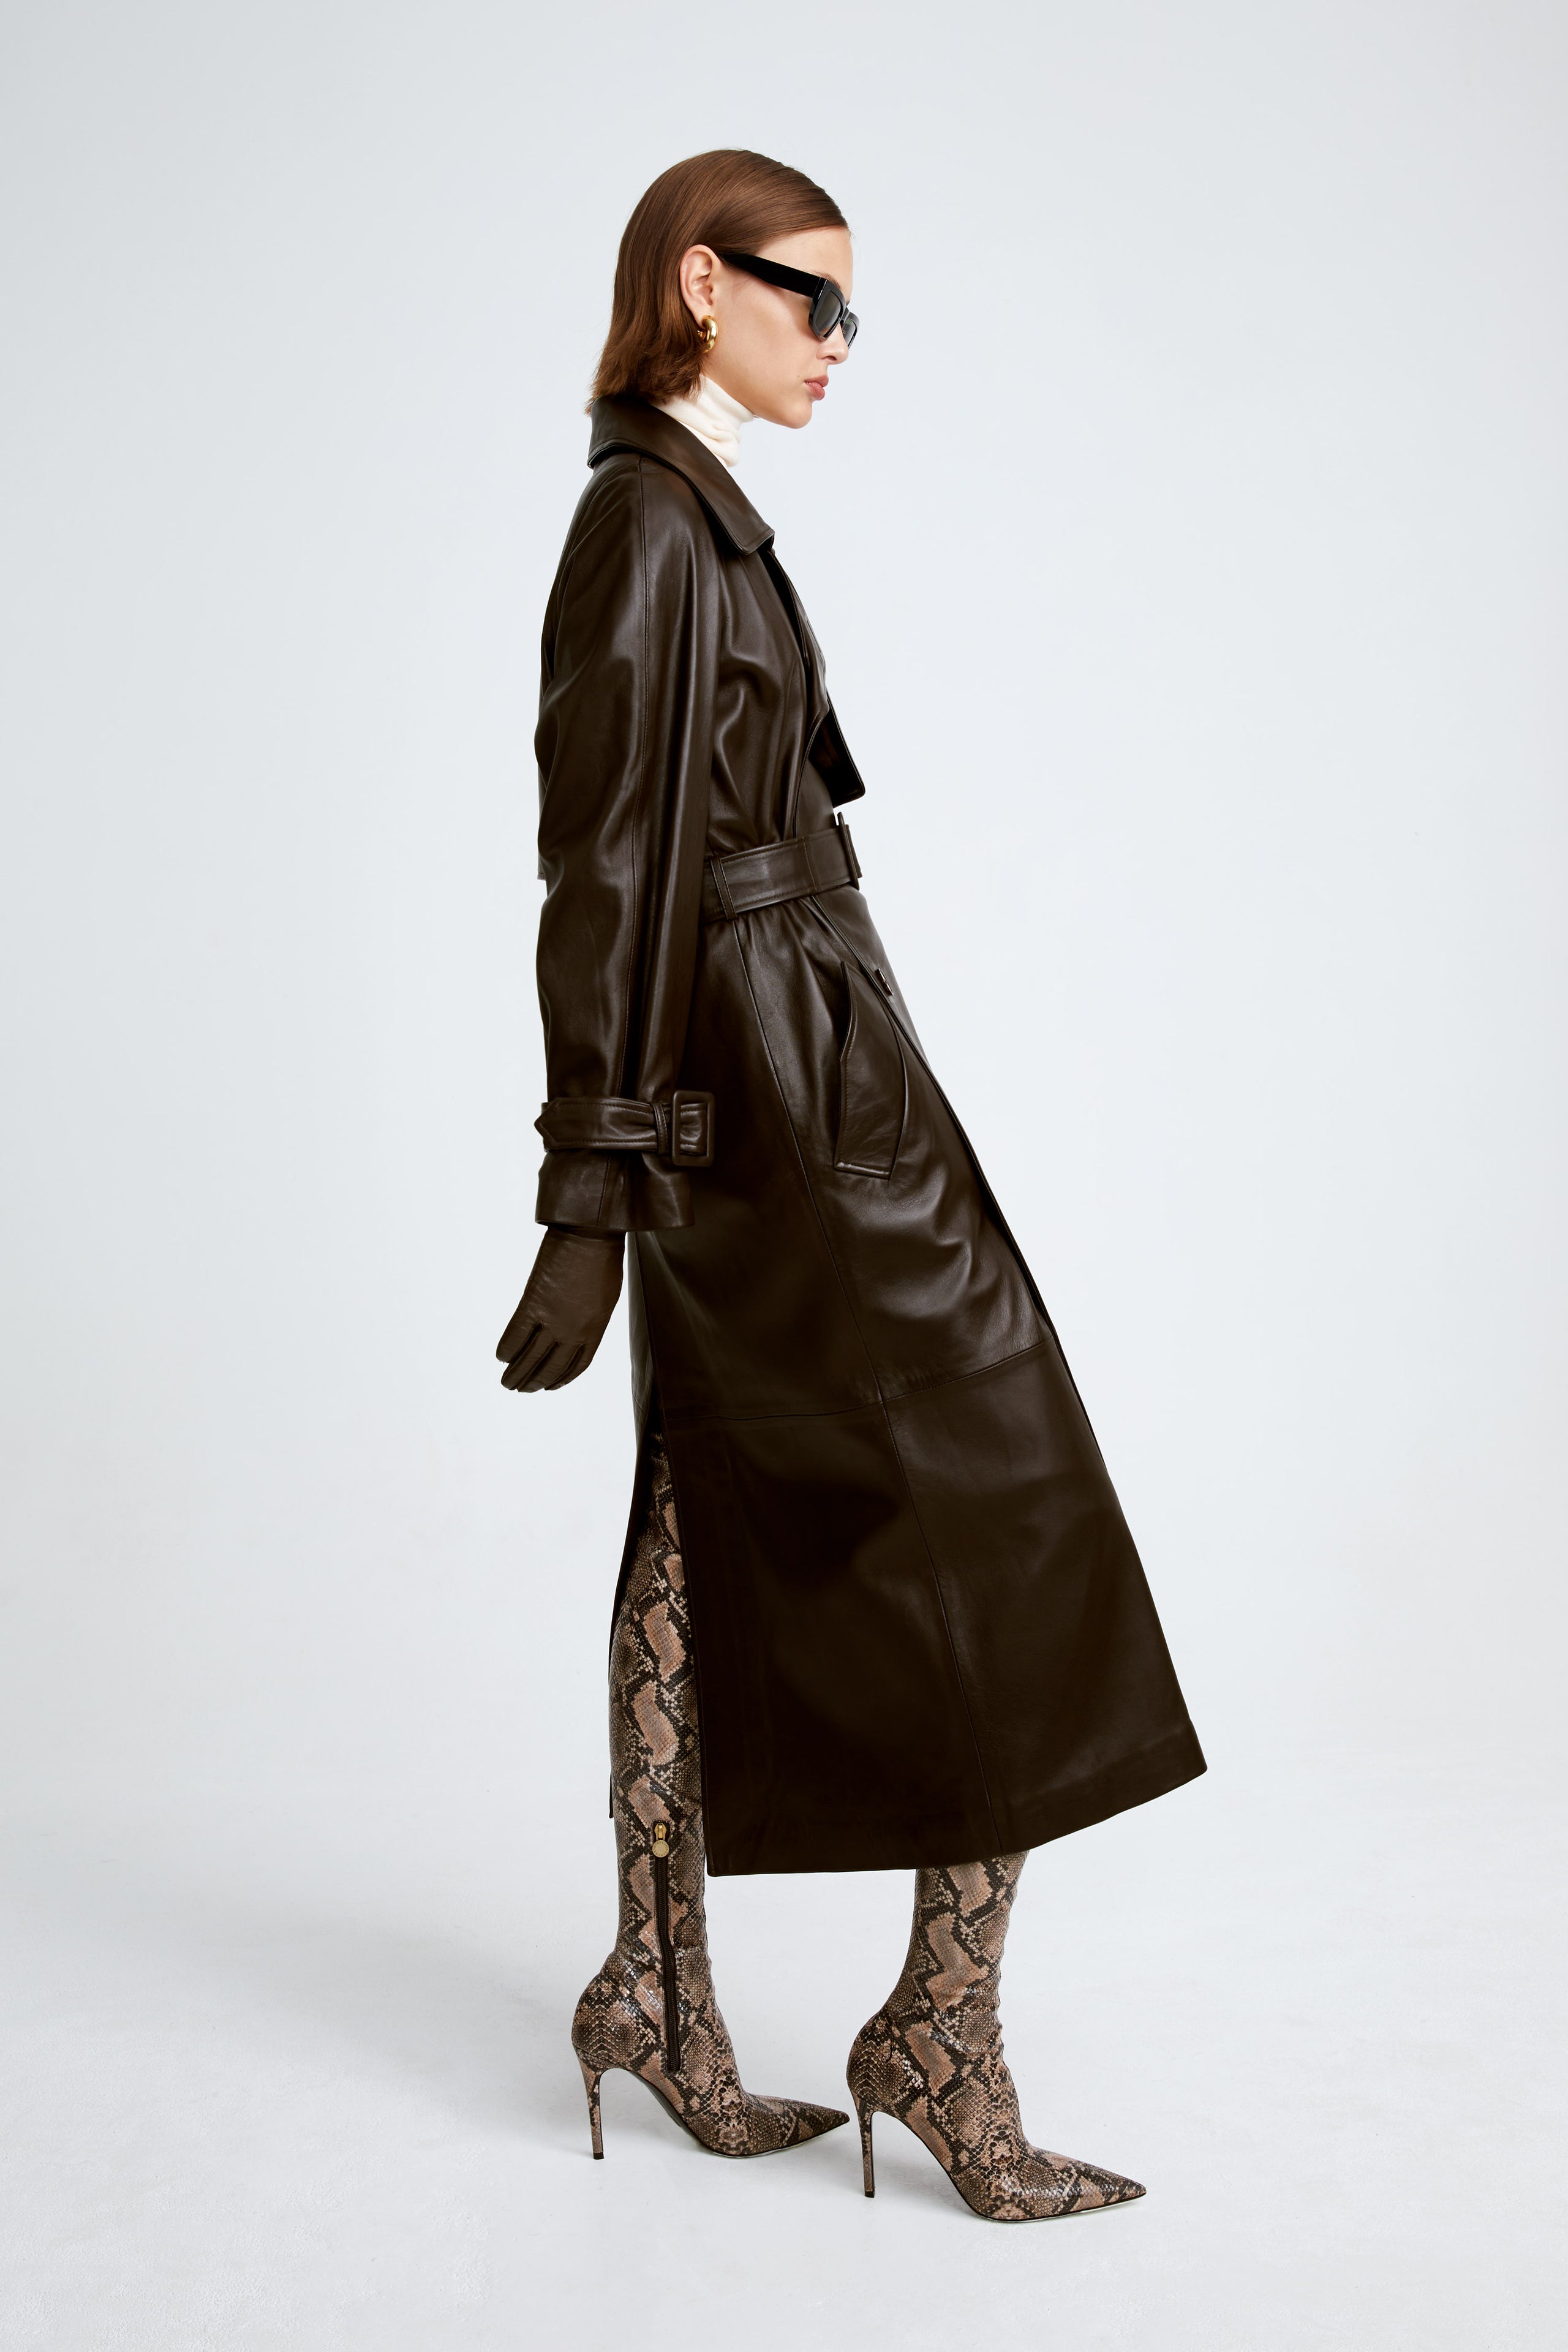 Model is wearing Nour Hammour's Henri Brown Leather Trench Coat - Side